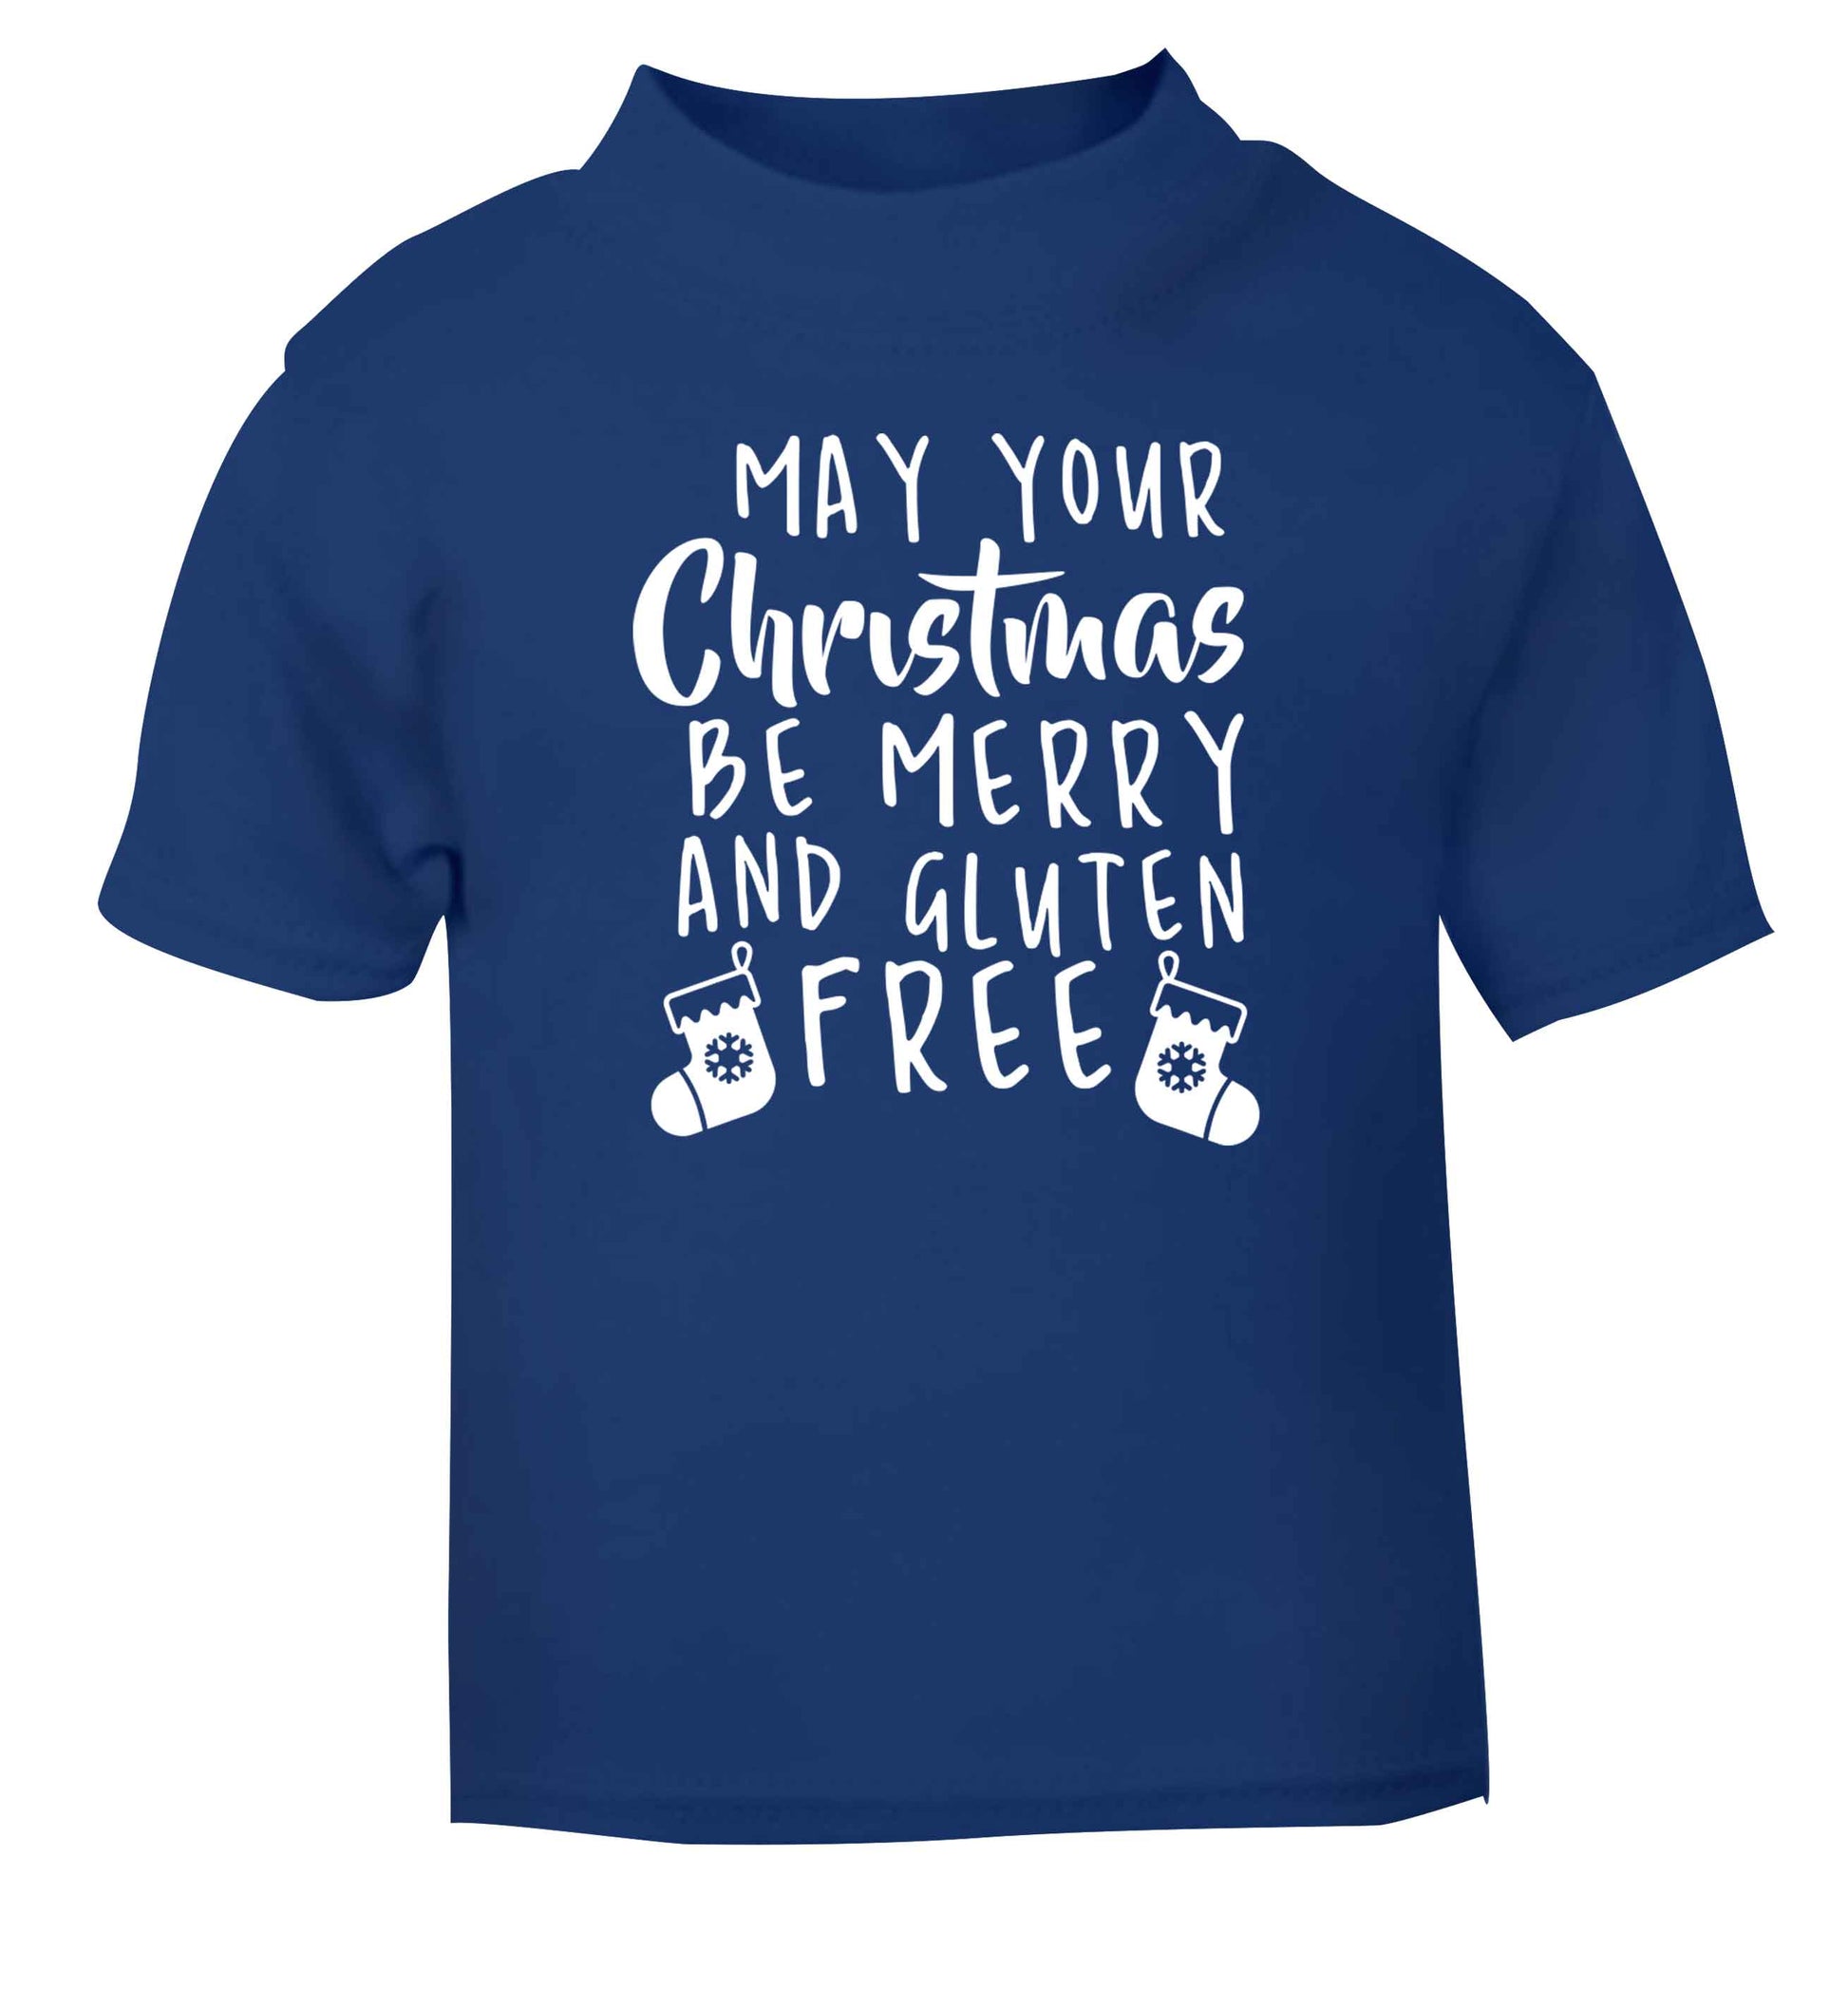 May your Christmas be merry and gluten free blue Baby Toddler Tshirt 2 Years